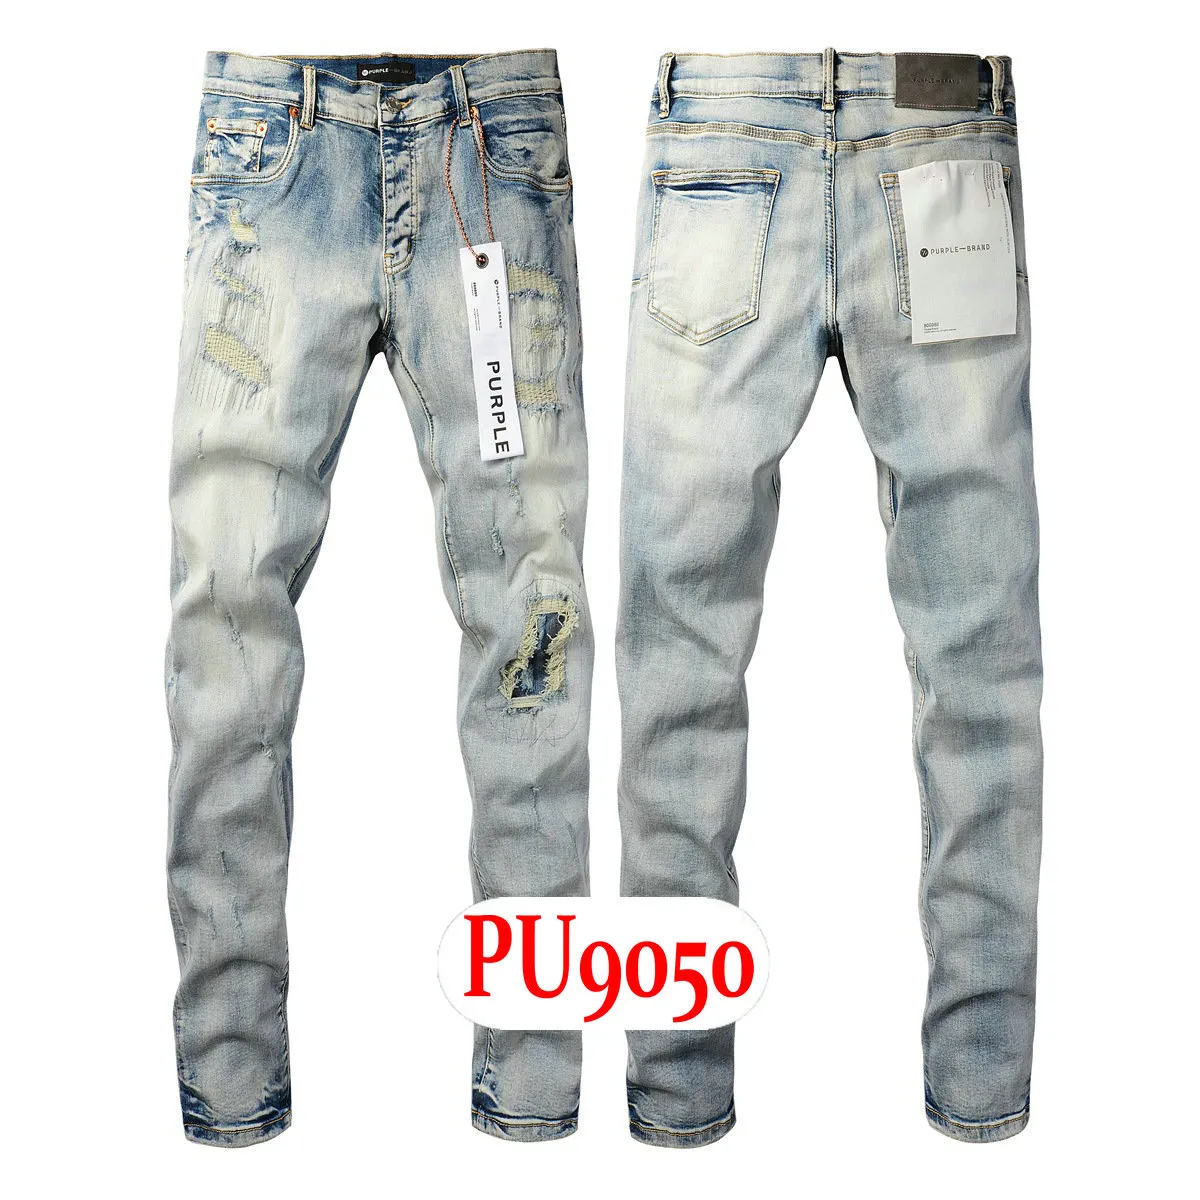 Mens Purple Jeans Designer Jeans Fashion Distressed Ripped Bikers Womens  Denim Cargo For Men Black Pants PU7043 From Perfect8988, $35.87